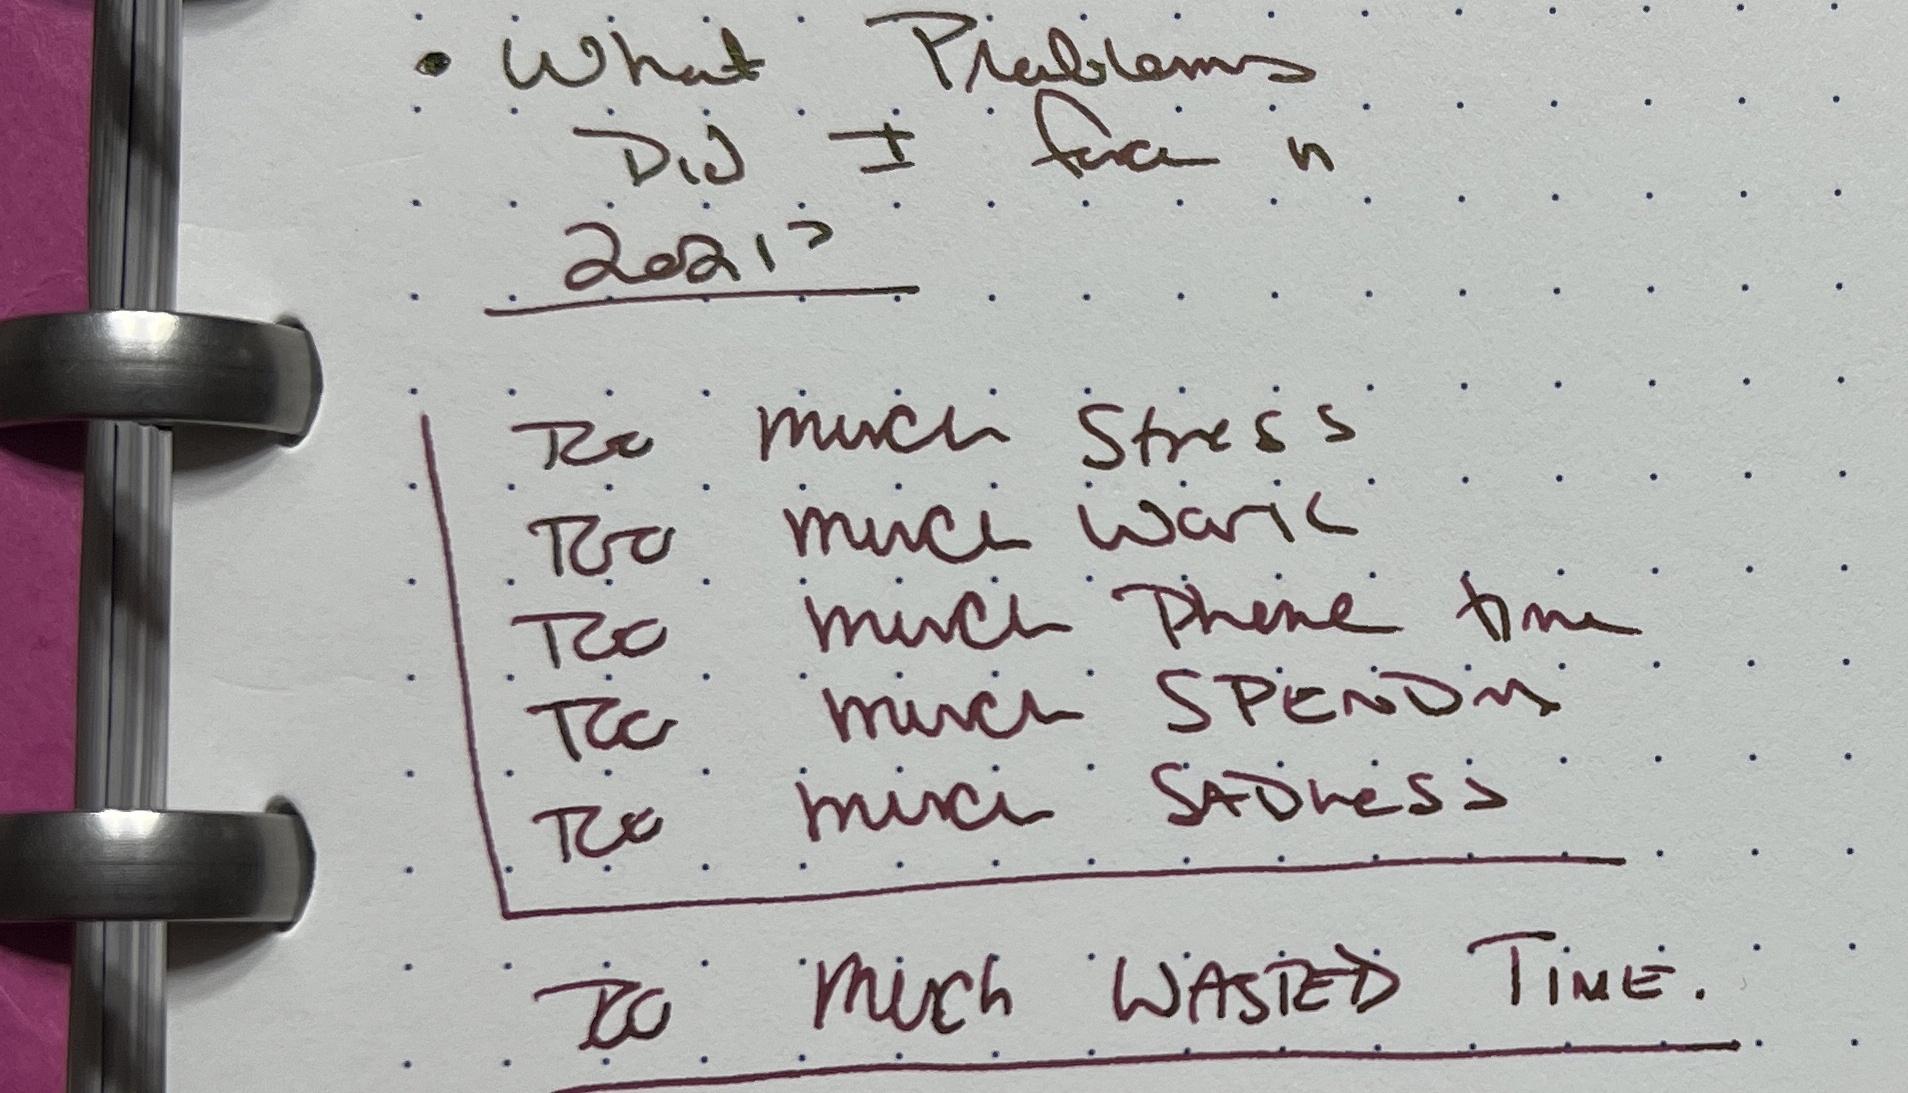 A photo of a notebook page with the text: 

What Problems did I face in 2021?
Too much stress
Too much work
Too much phone time
Too much spending
Too much sadness
Too much wasted time